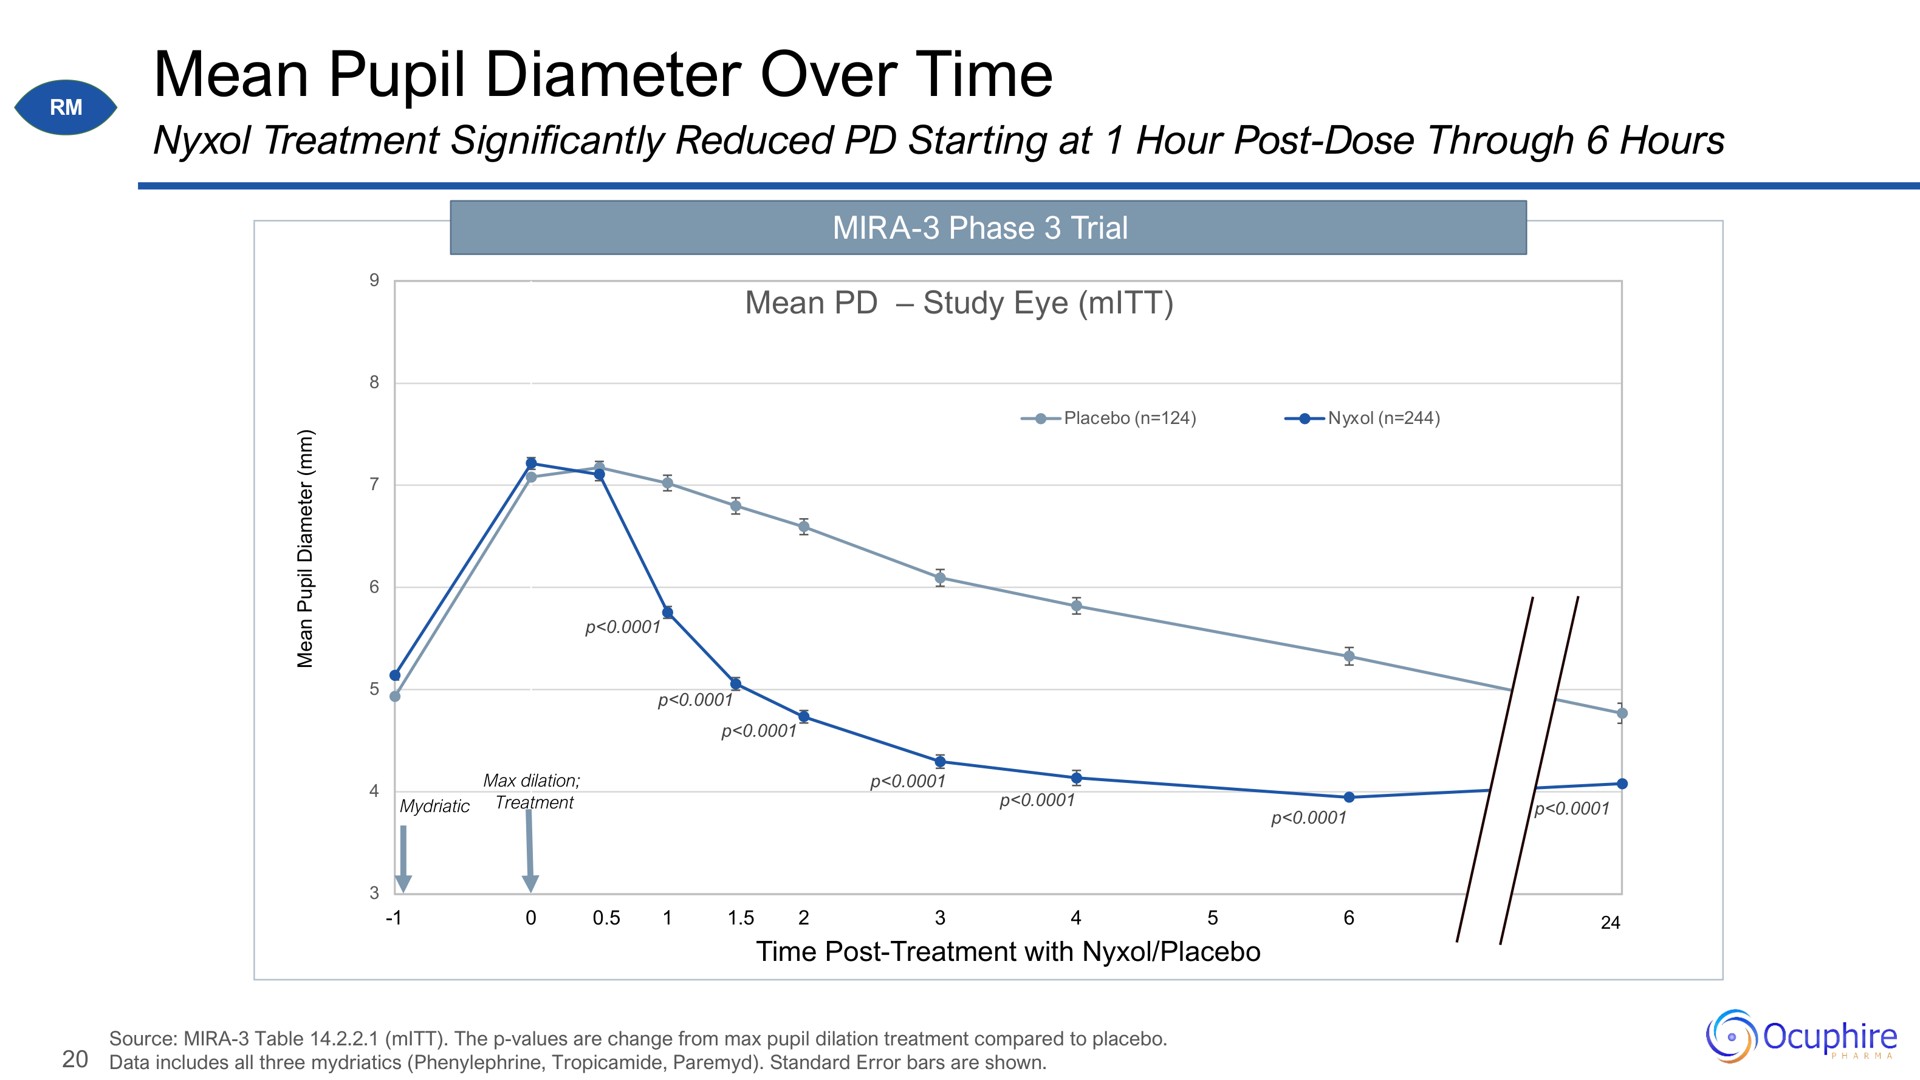 mean pupil diameter over time | Ocuphire Pharma